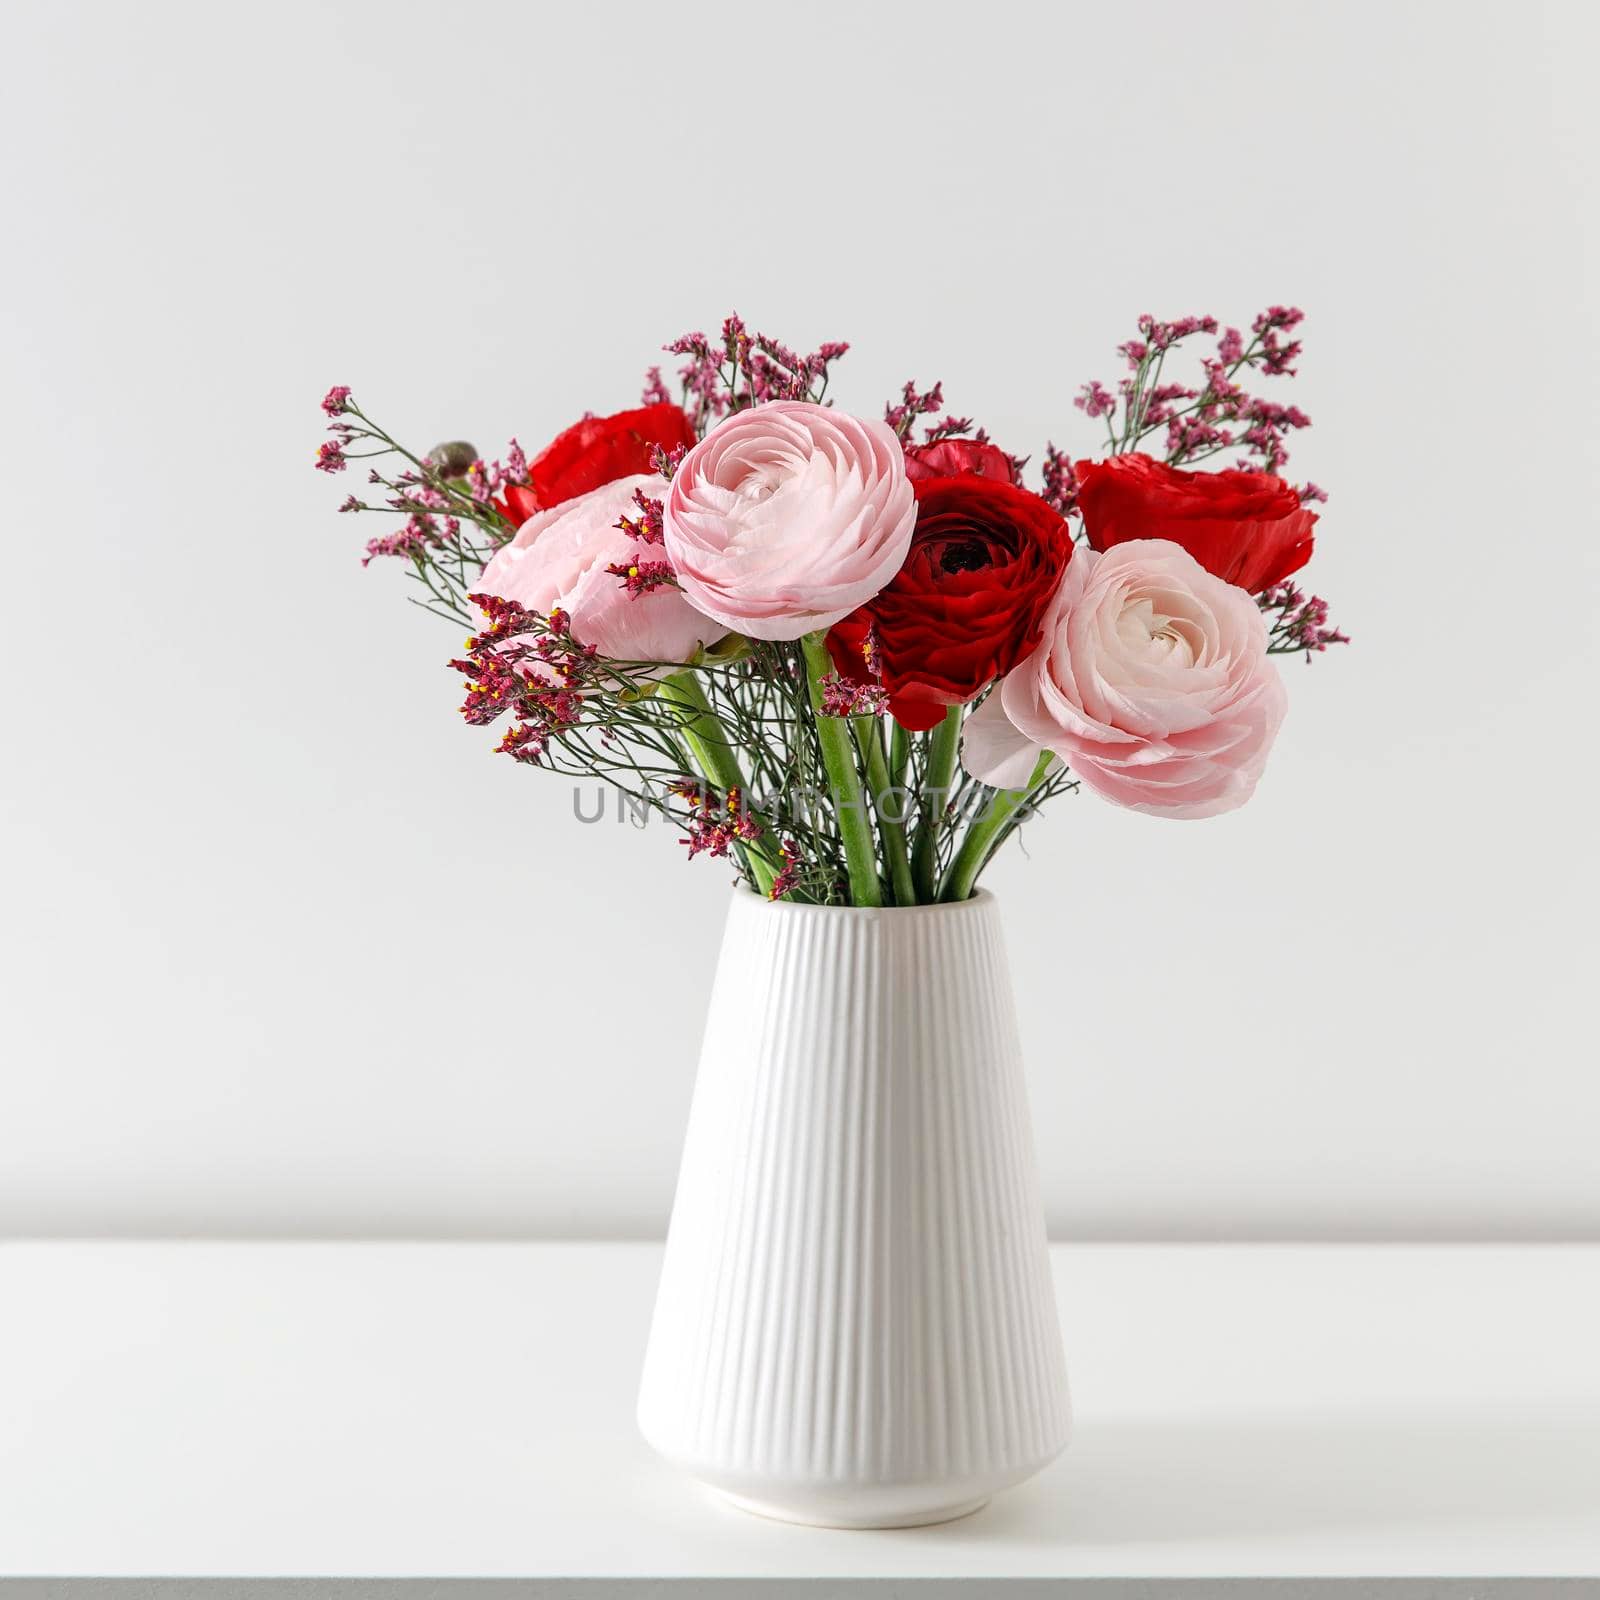 Persian pink buttercup in a beige wicker basket on a white background. Copy space